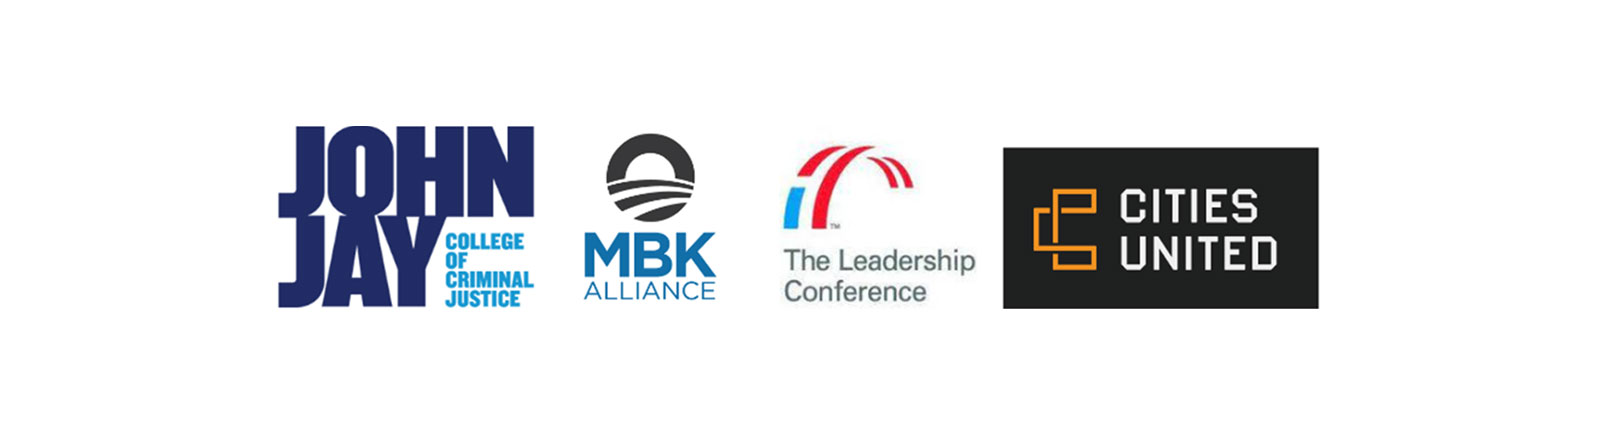 Logos: John Jay College, Cities United, My Brothers Keeper Alliance, Leadership Conference